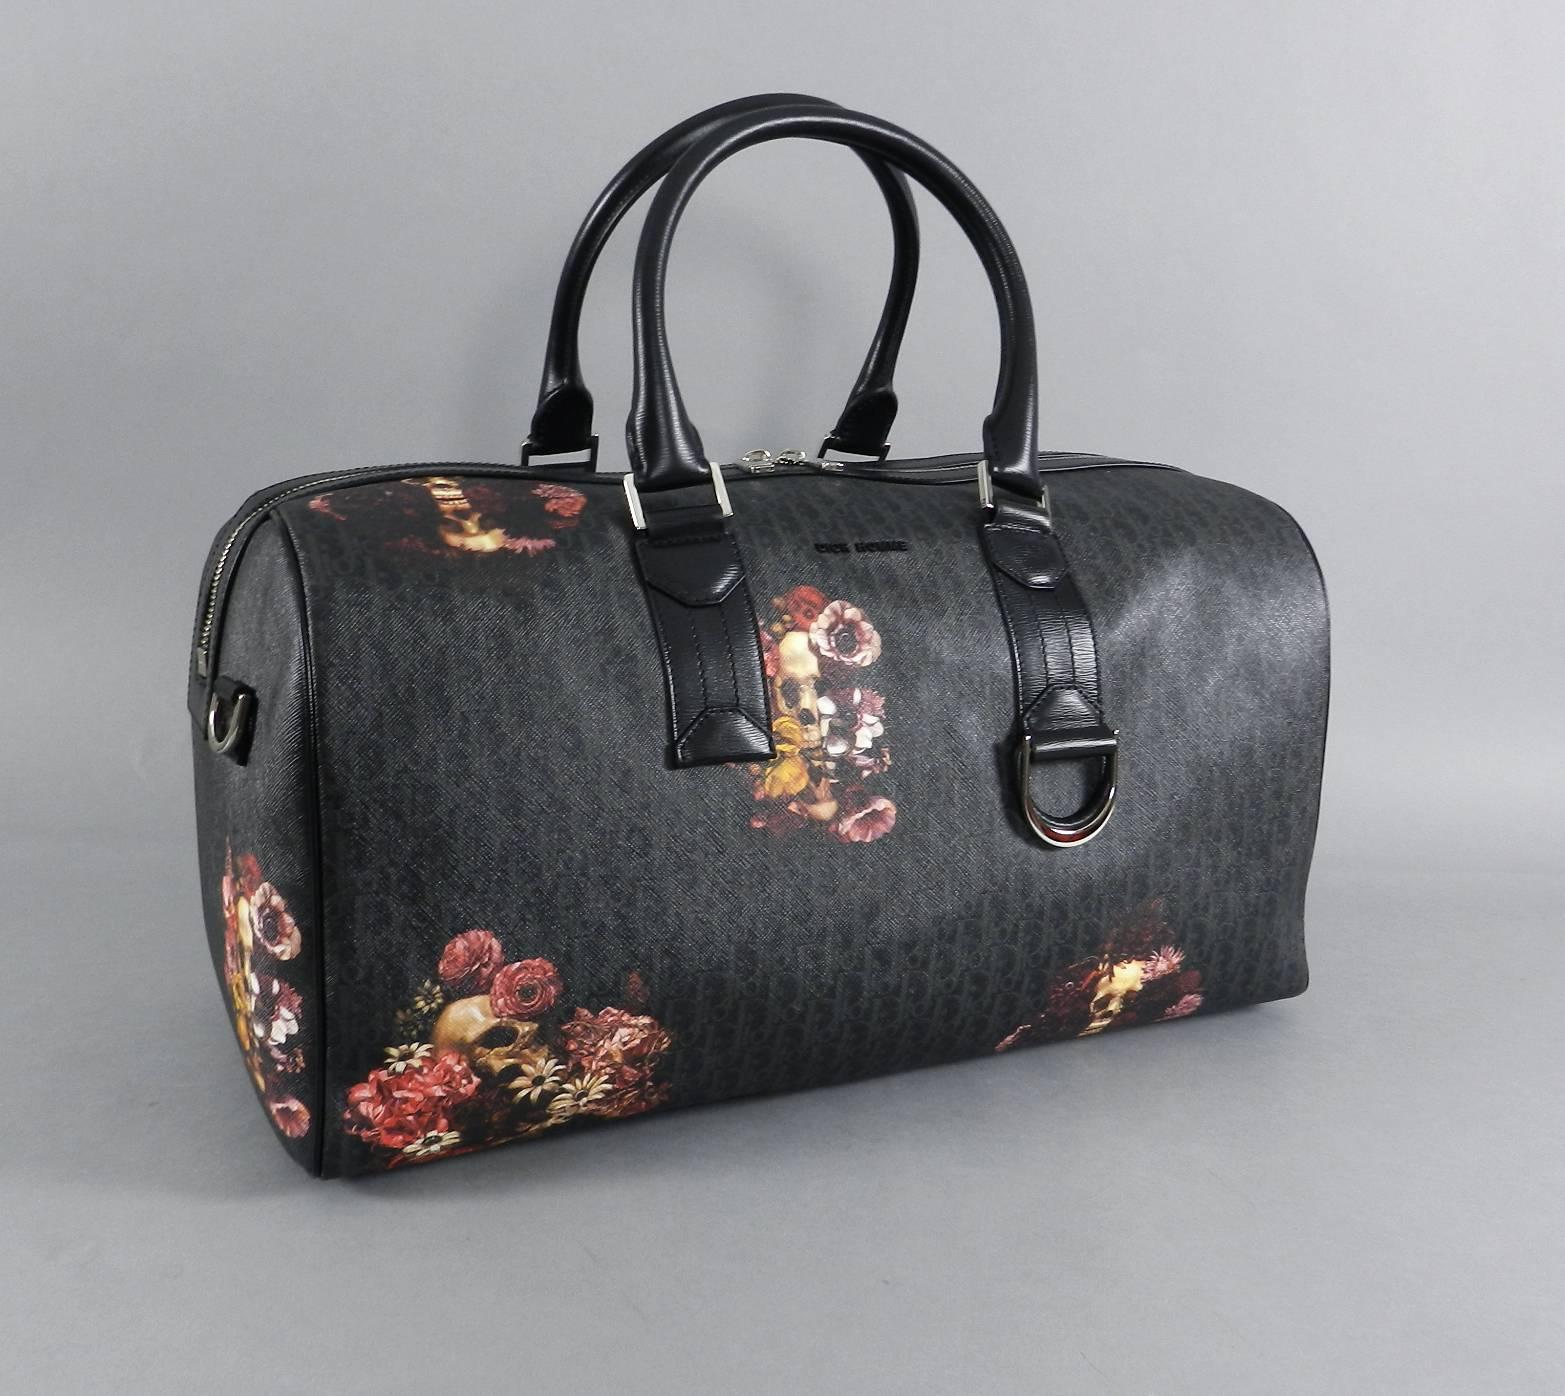 Dior homme men's travel duffle bag from Spring / Summer 2017 collection.  Limited edition collaboration with Japanese artist Toru Kamei.  Signature monogram coated canvas with floral momento mori skull design.  New without tags.  Includes removable